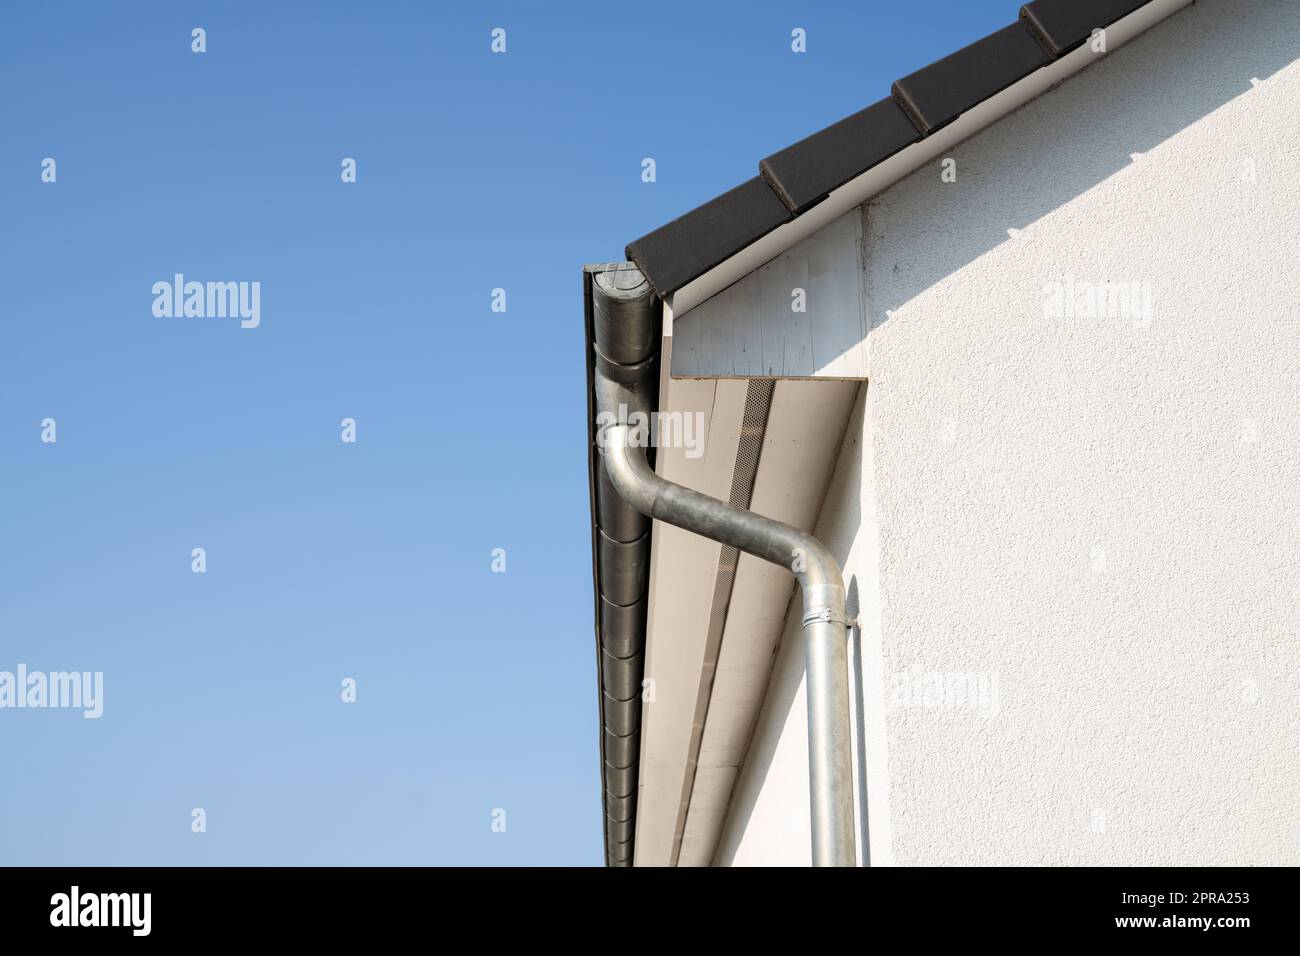 House Roof Drainage. Residential Home Exterior Stock Photo